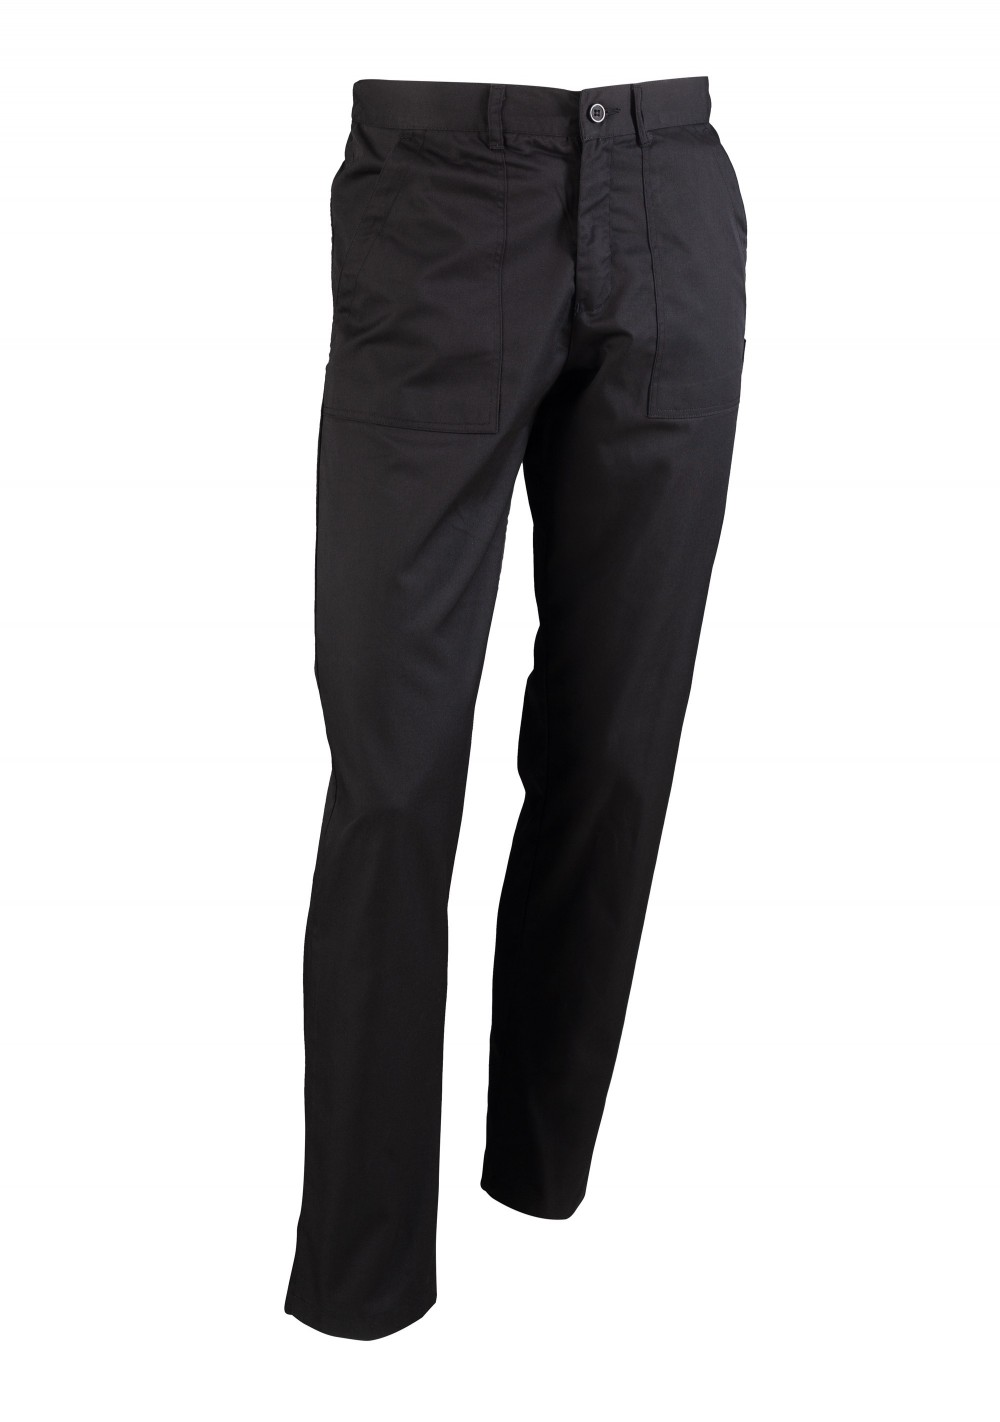 Men's Chef Trousers, Men's Chef Pants in Black with Patch Pockets